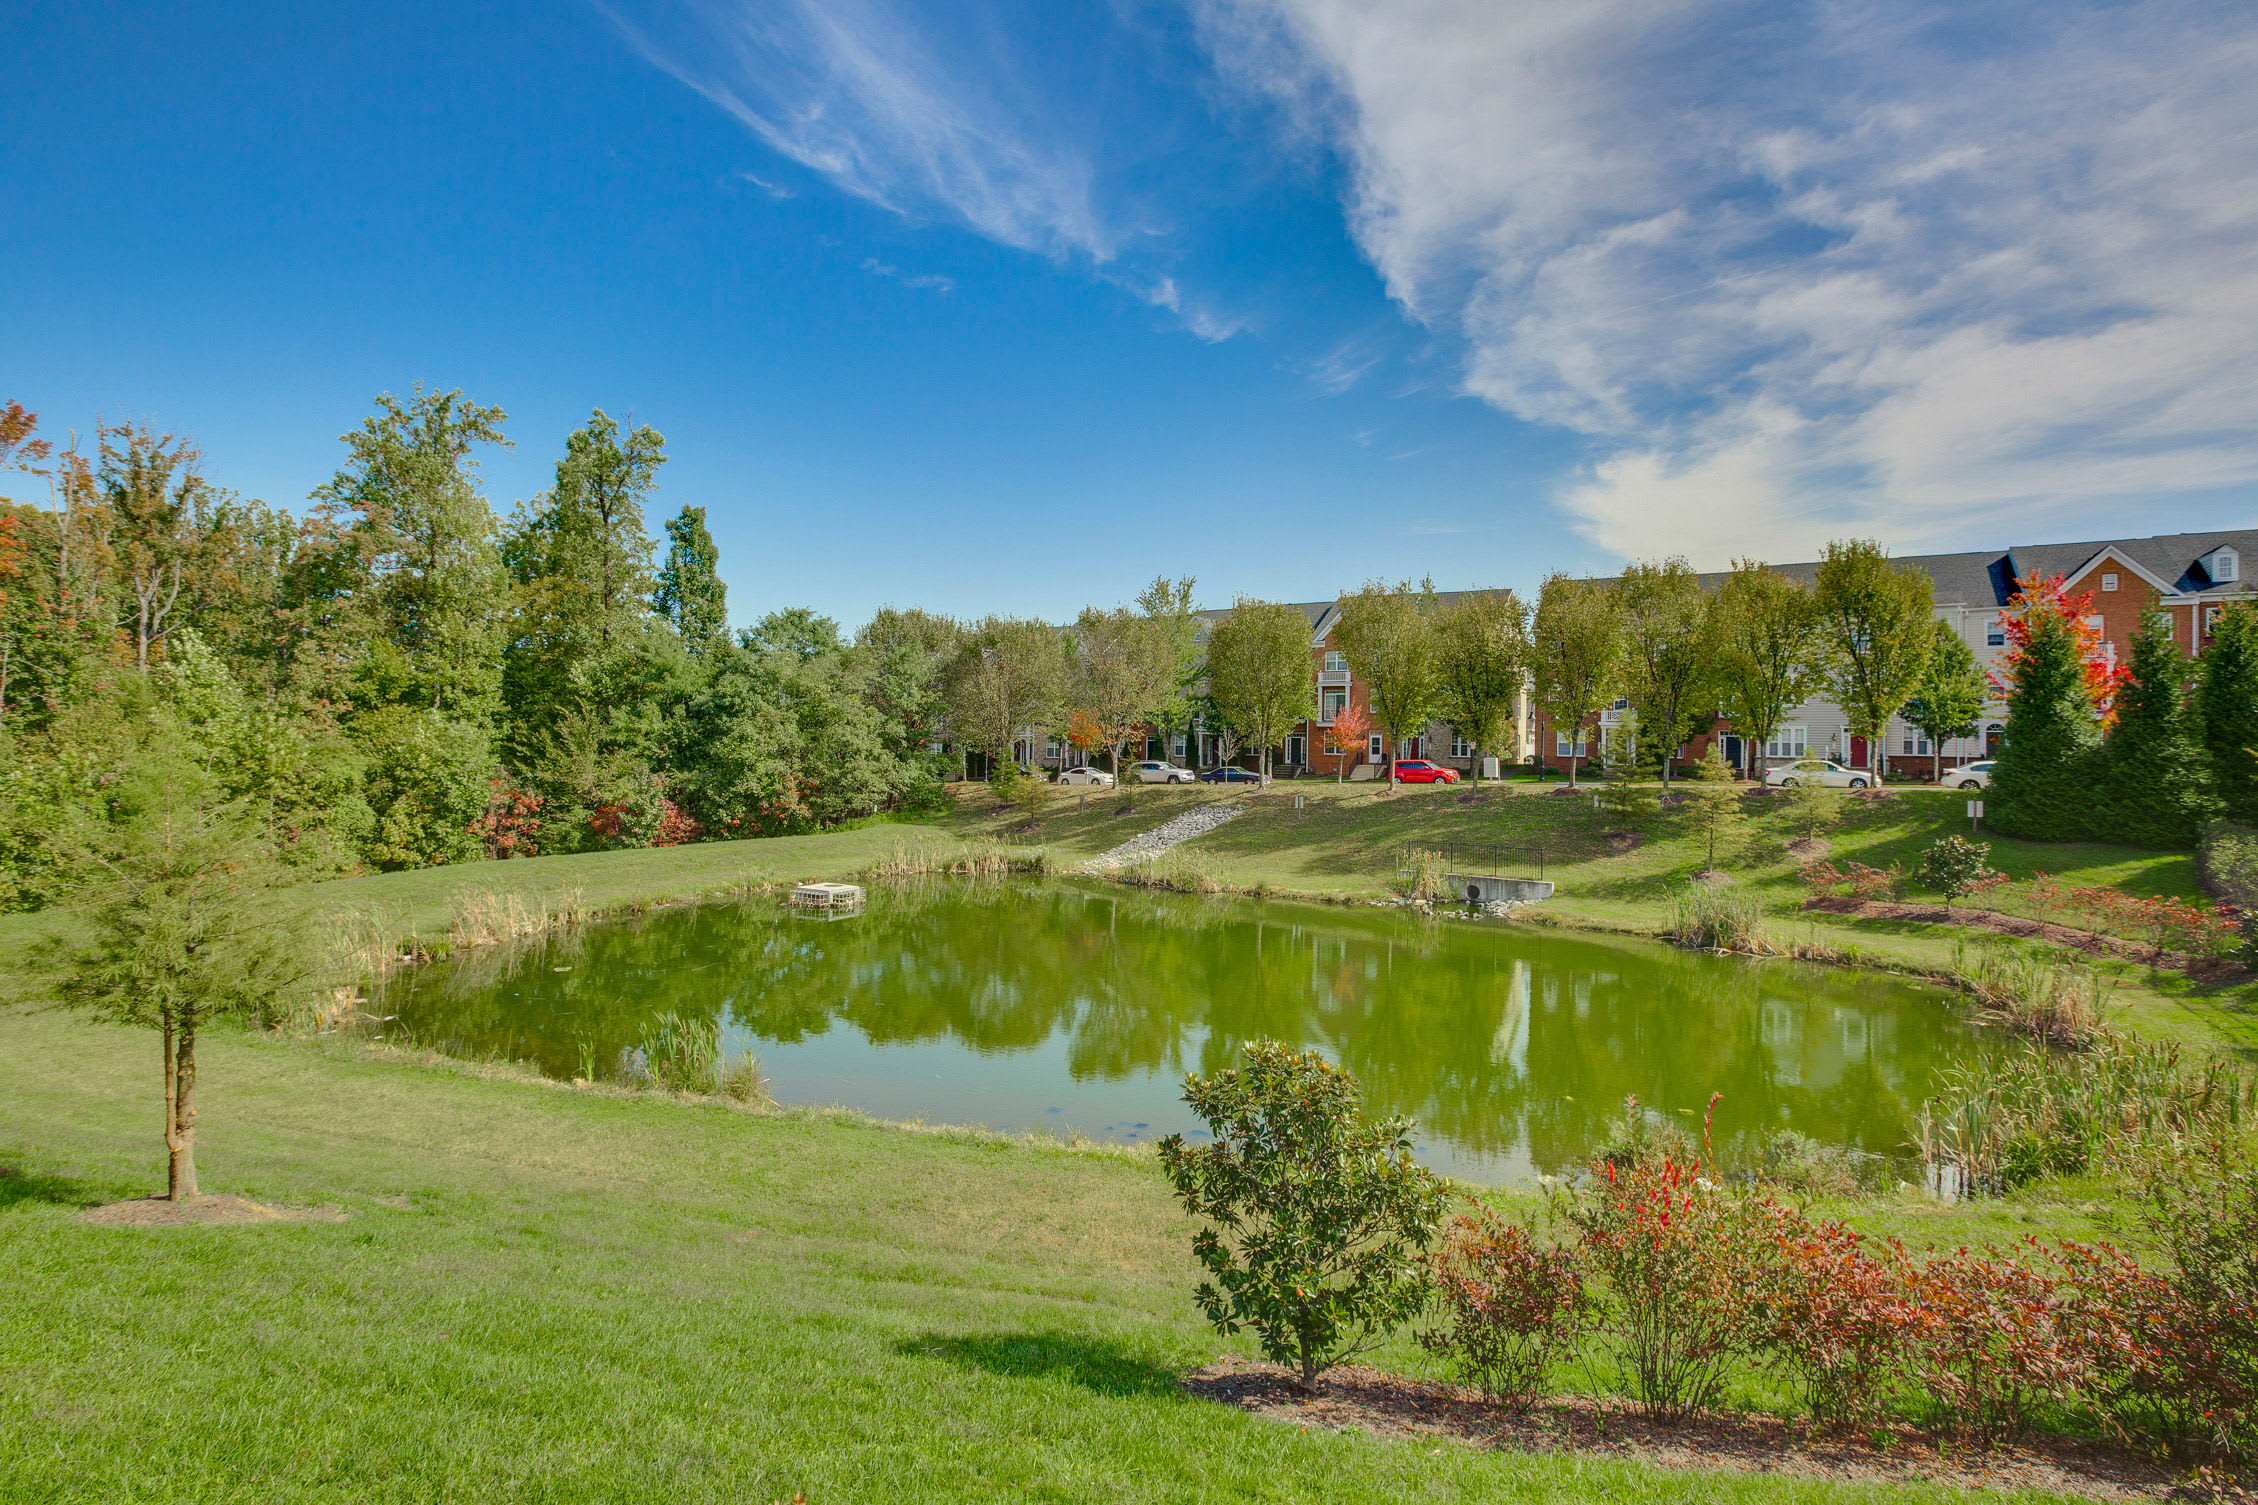 Landscaped grounds at Summerfield at Morgan Metro in Hyattsville, Maryland